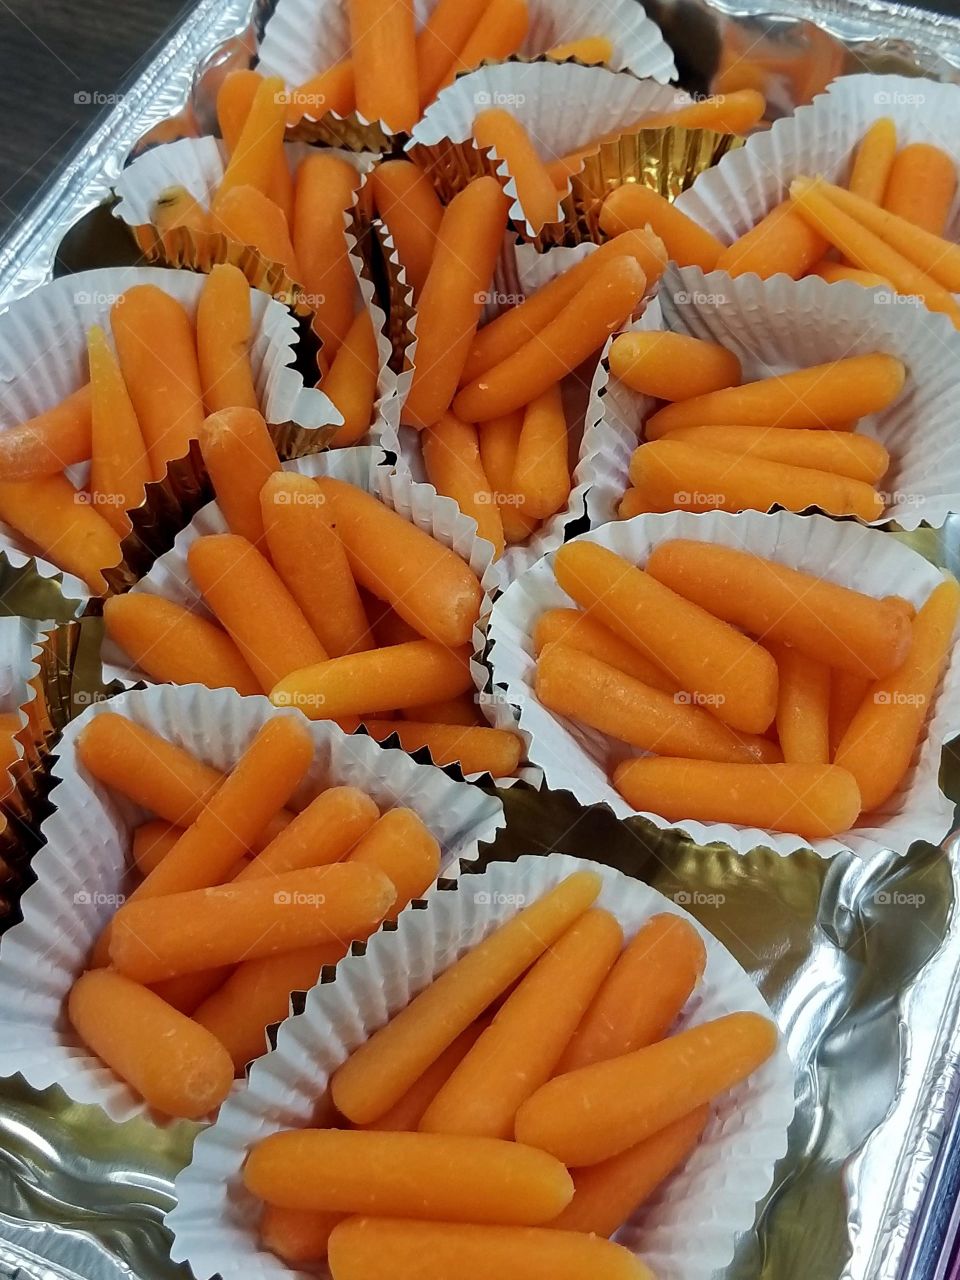 Carrots are a healthy snack,  proportioned perfectly for kids.  vegetables